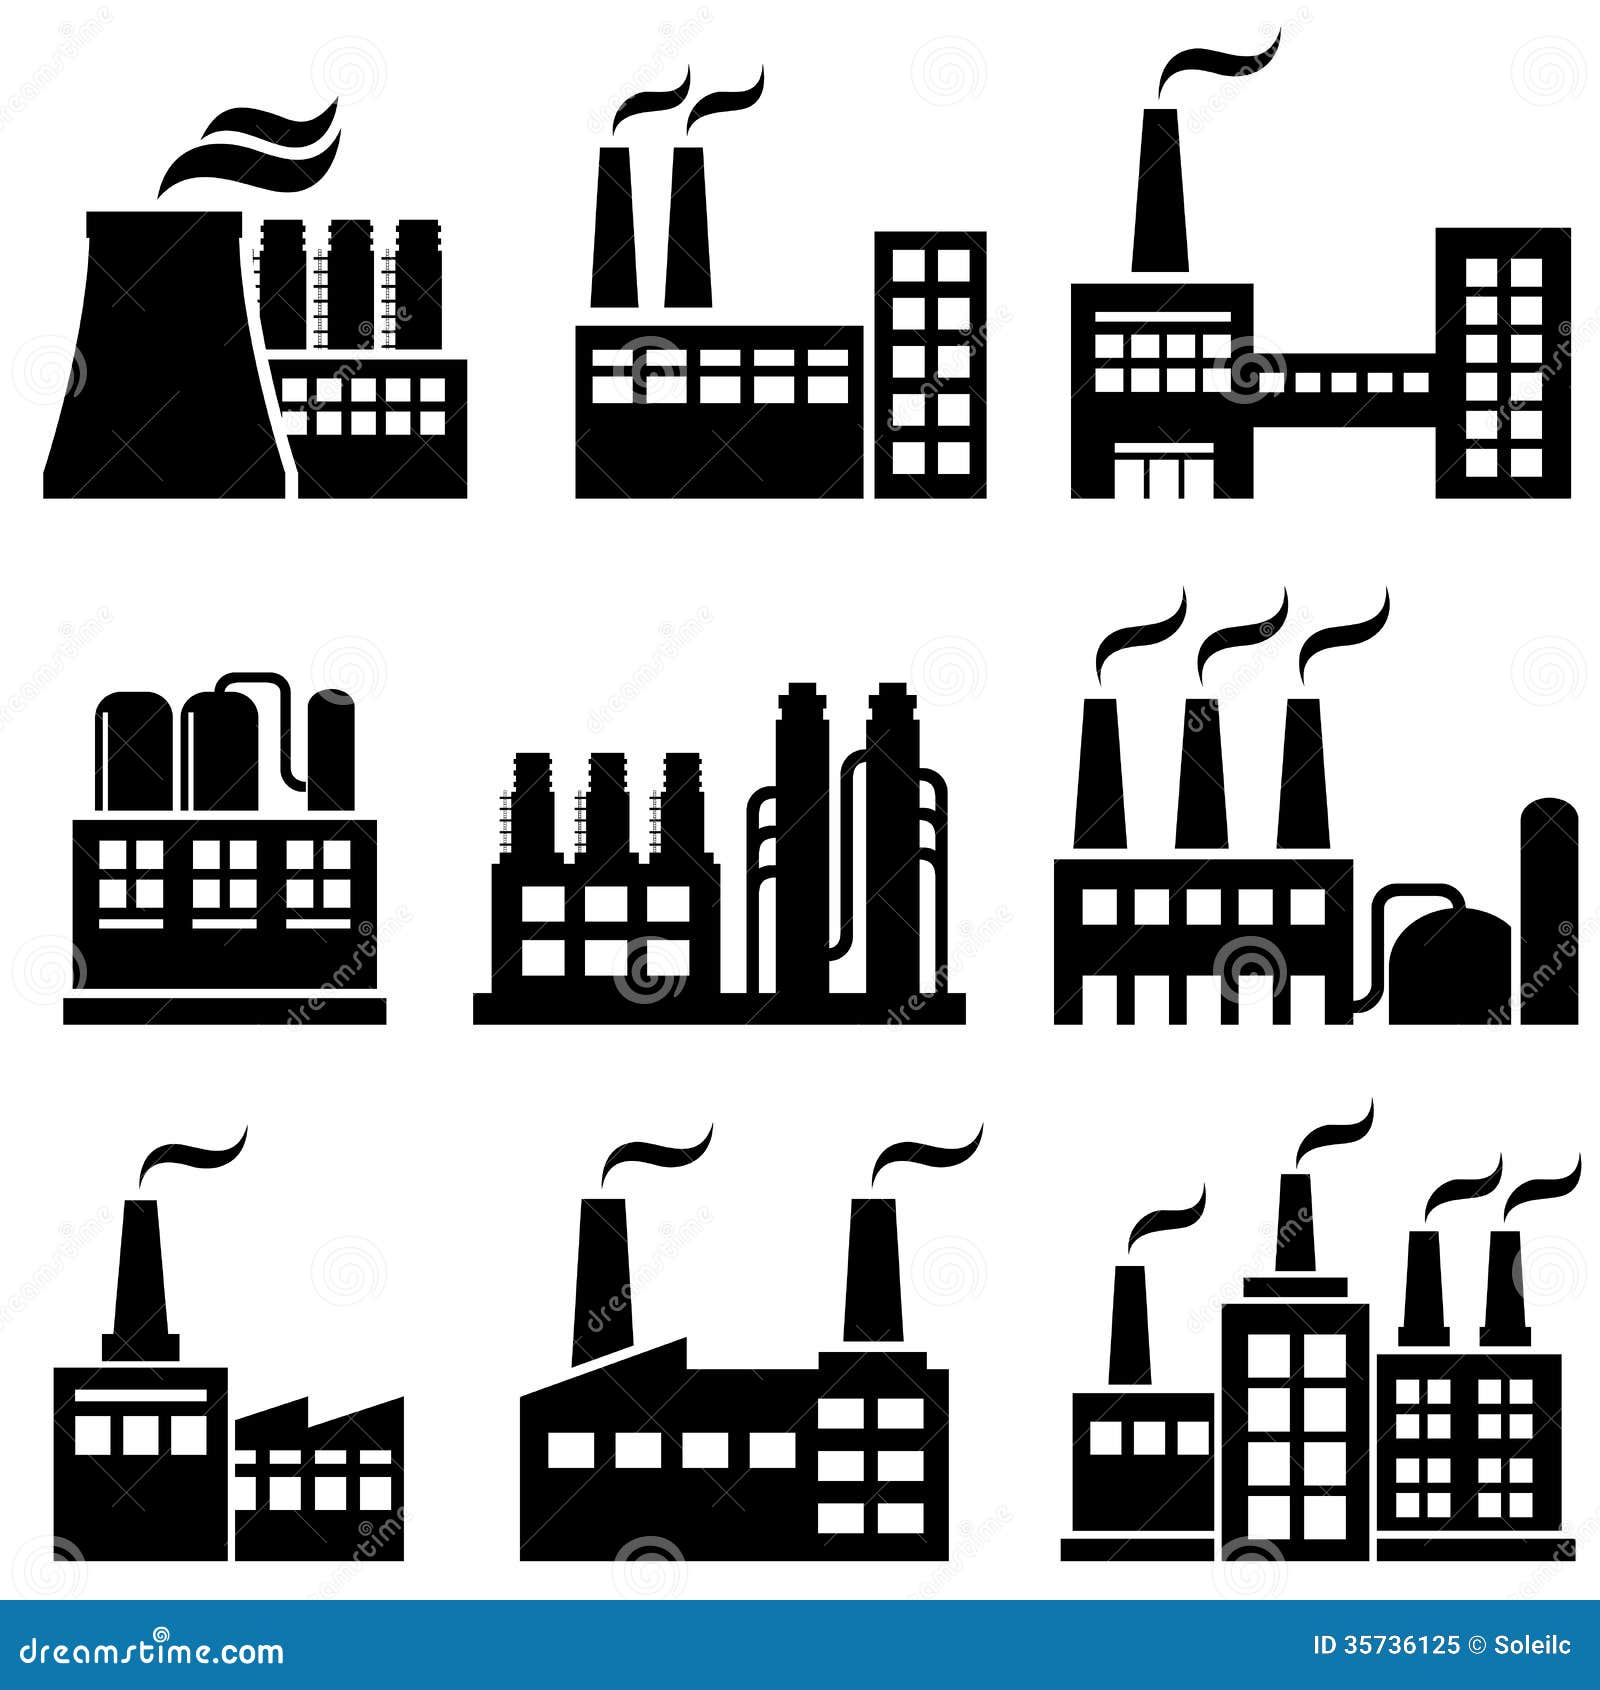 industrial clipart free download - photo #15